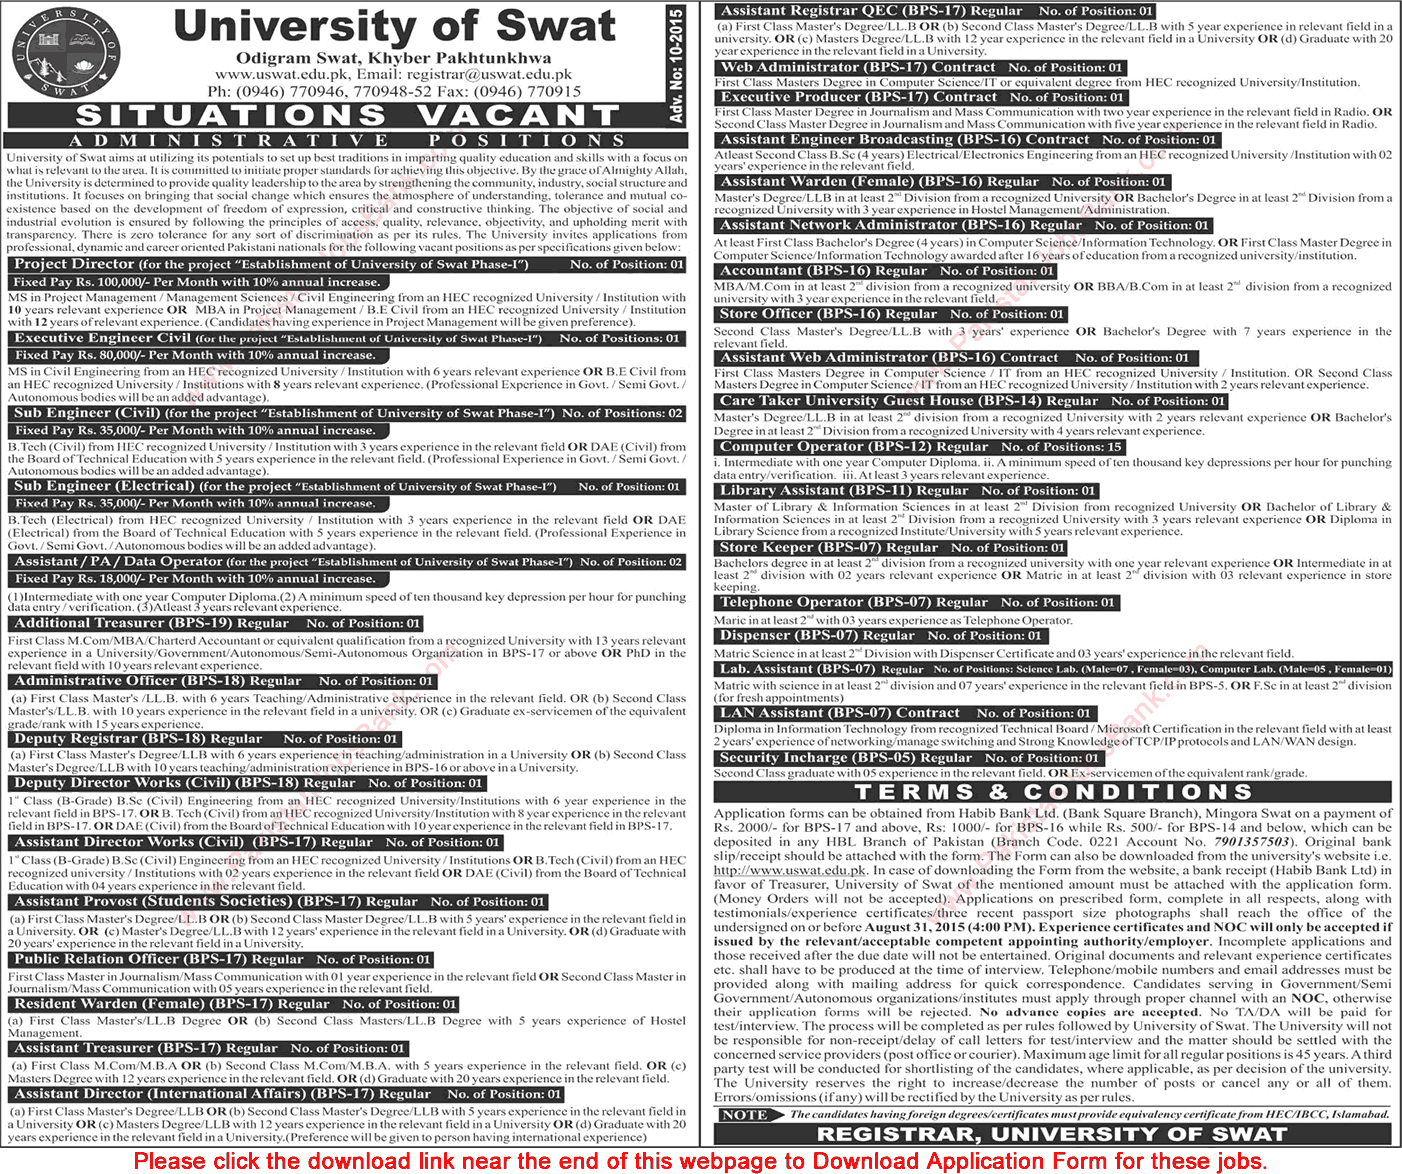 University of Swat Jobs 2015 August Application Form Download Administrative Staff Latest